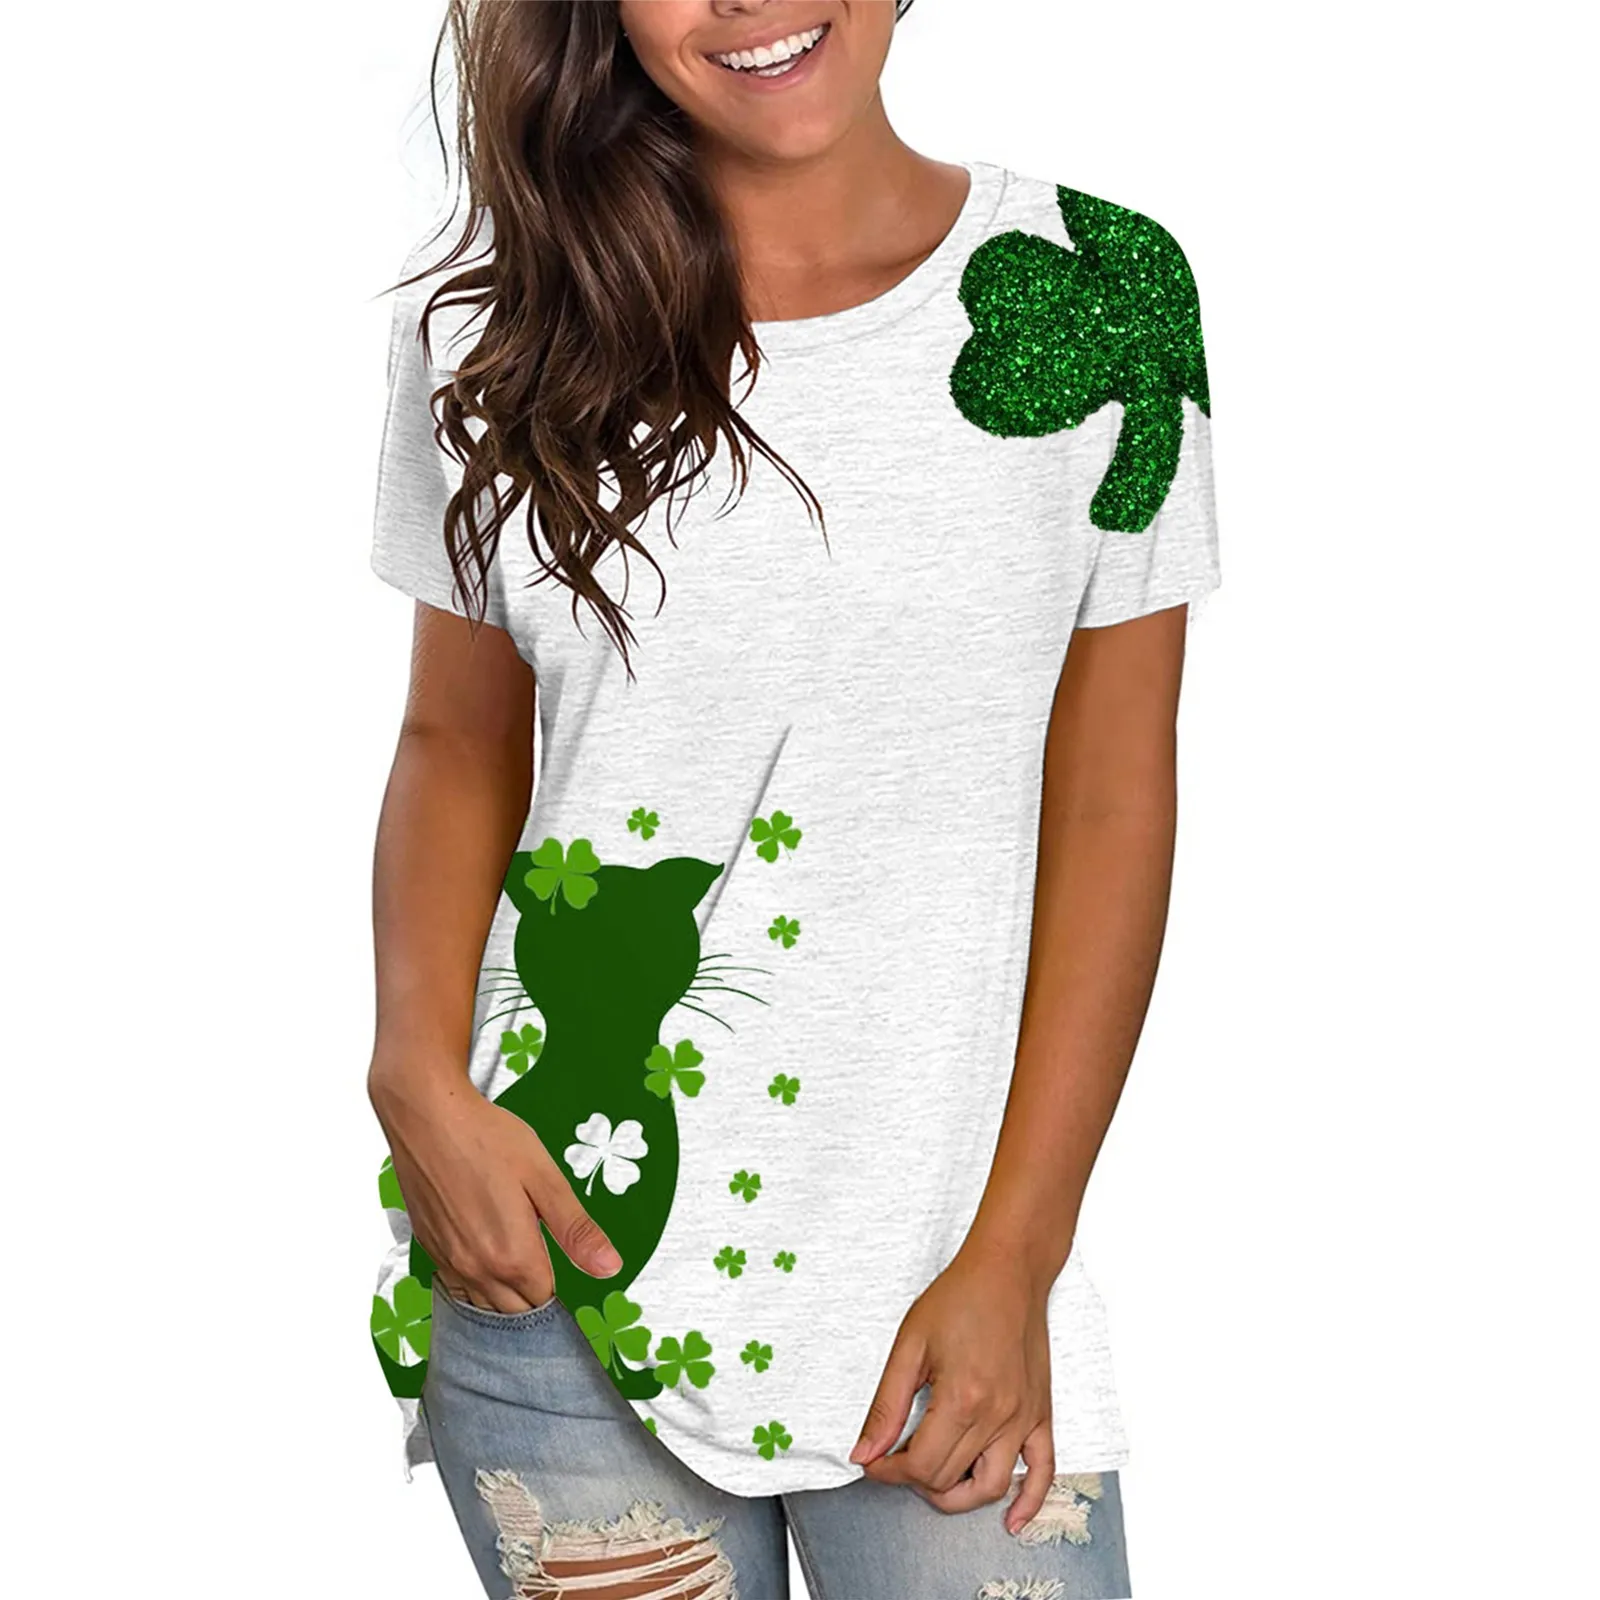 Patrick’s Day Short Sleeve Tops Ladies T shirt Harajuku St Patricks Day Gift May The Luck Of the Irish Be With You Popular Tops friends t shirt Tees